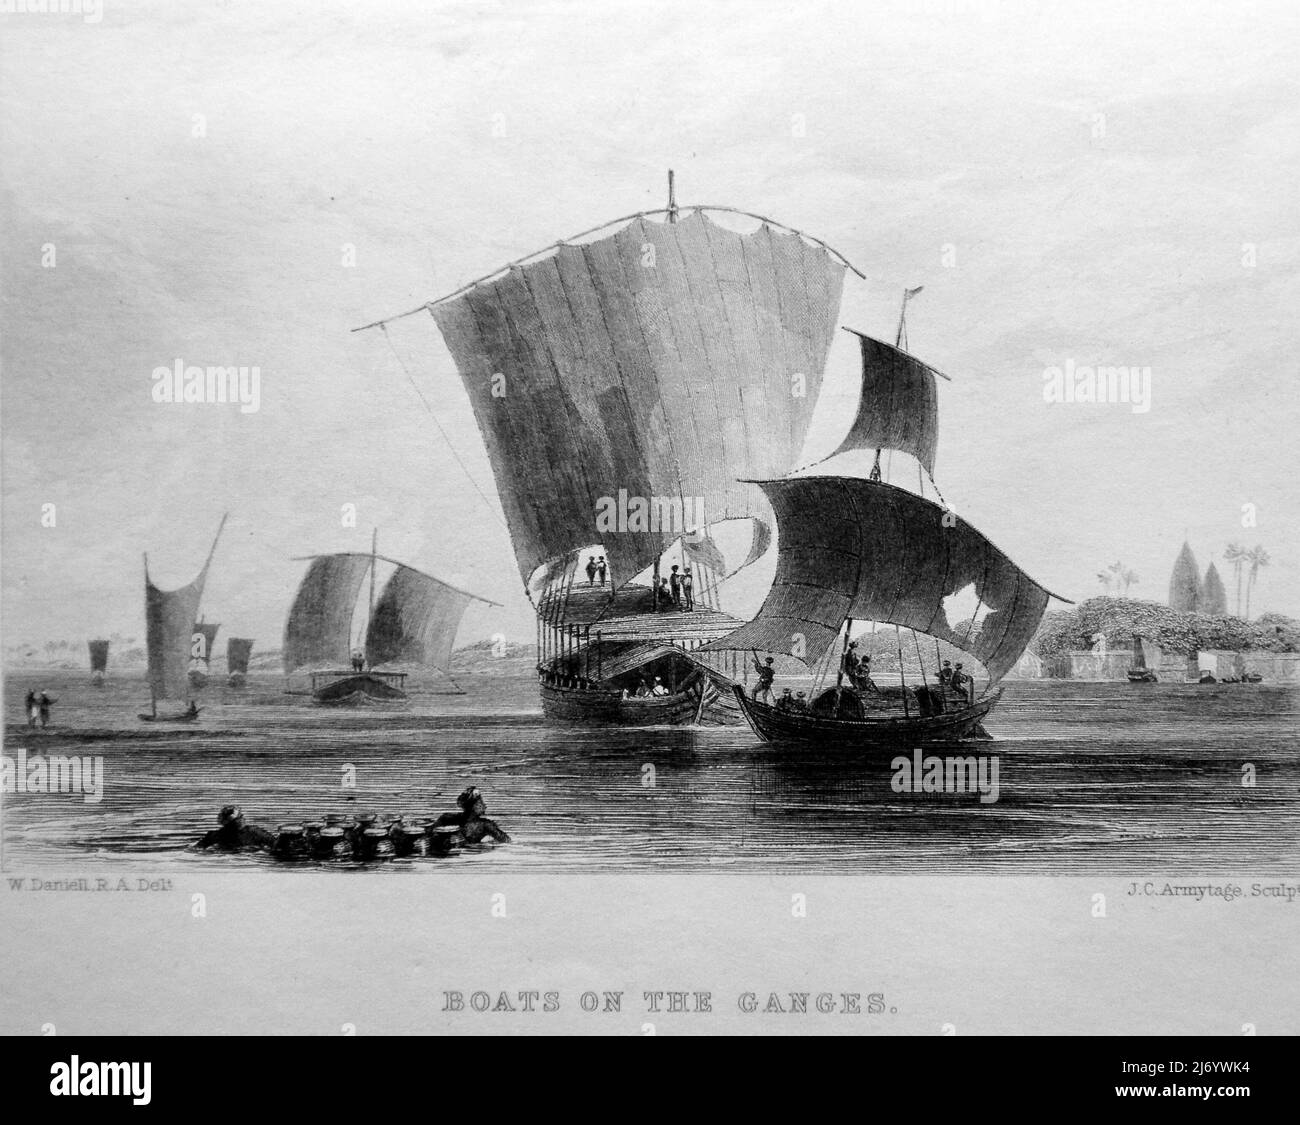 Illustration of 'Boats on the Ganges' from the book:  'The history of India and of the British Empire in the East' by Nolan, E.H., Published by Virtue & Co. Ltd, London, 1861. Stock Photo